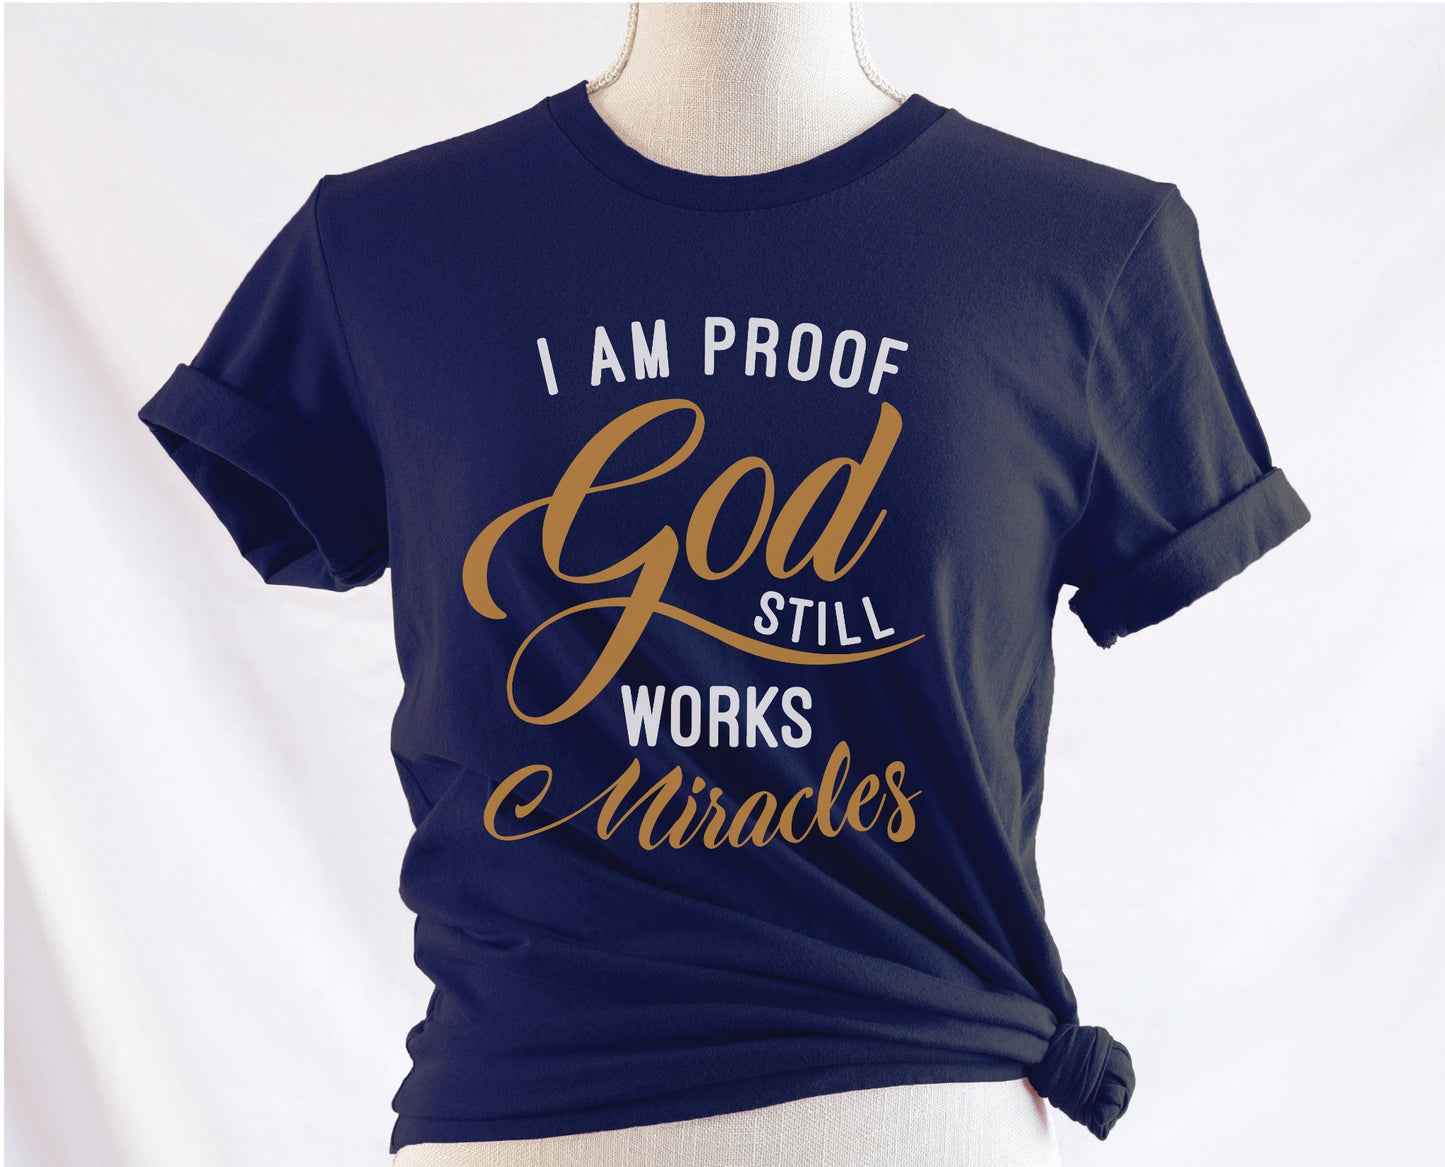 I am proof God still works miracles Christian aesthetic testimony design printed in white and gold on soft navy blue unisex t-shirt for women